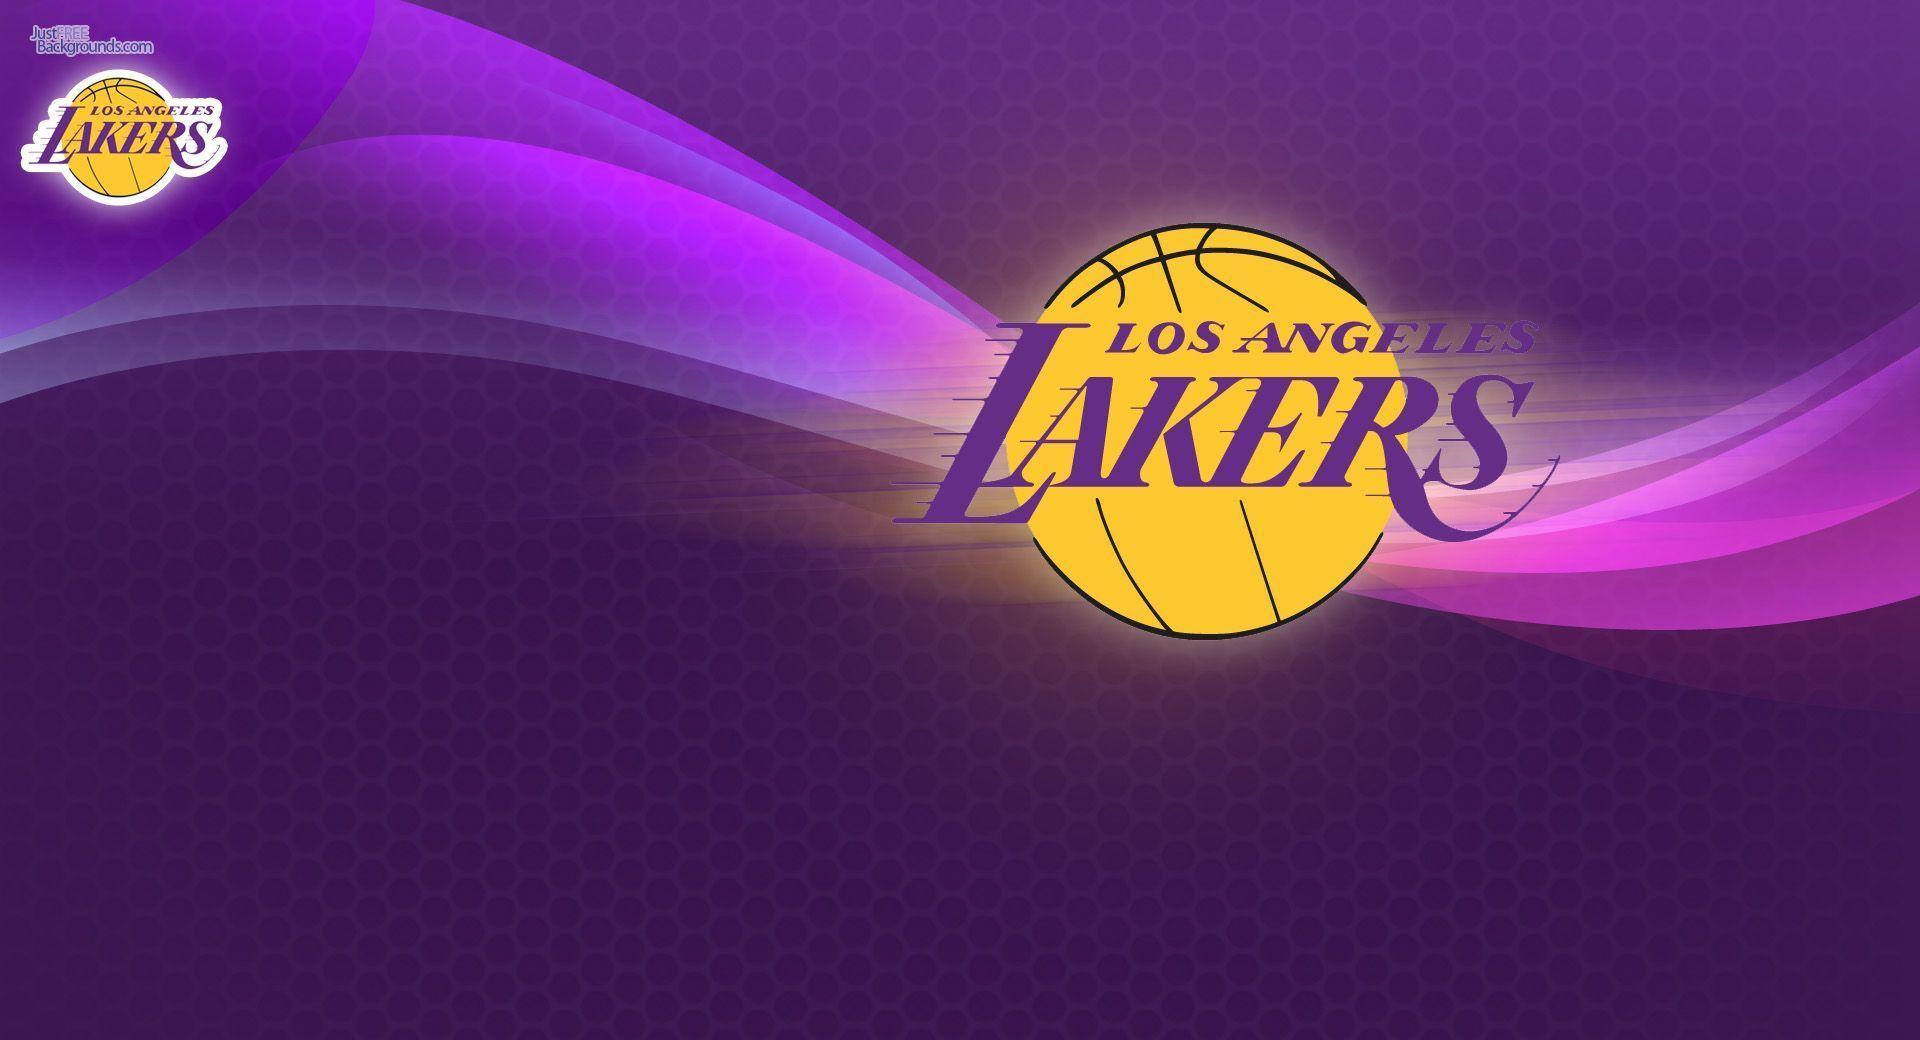 Los Angeles Lakers Logo Background. High Definition Wallpaper